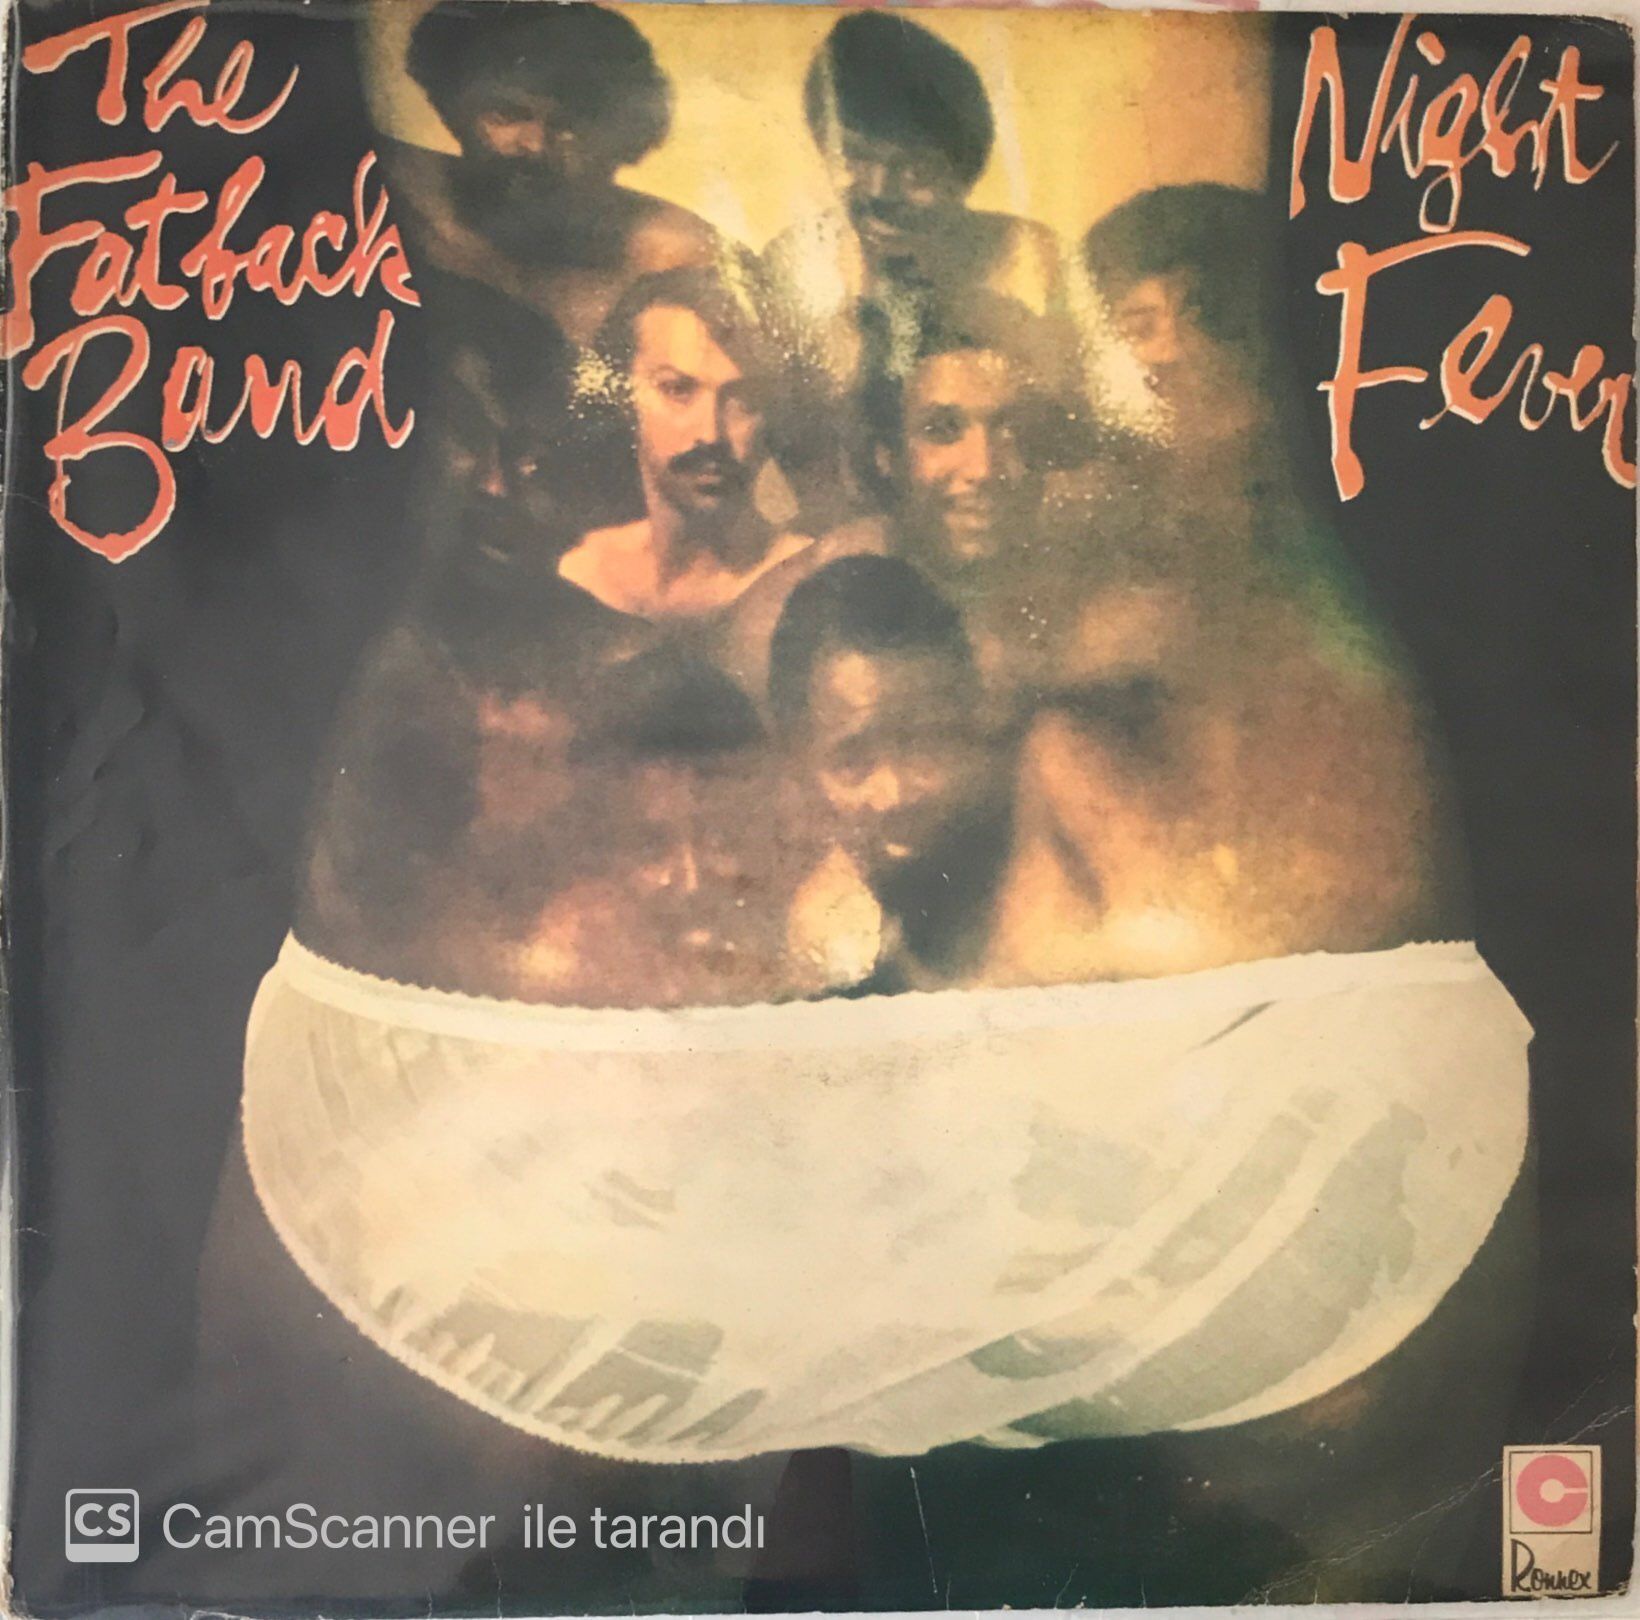 The Fatback Band Night Fever LP